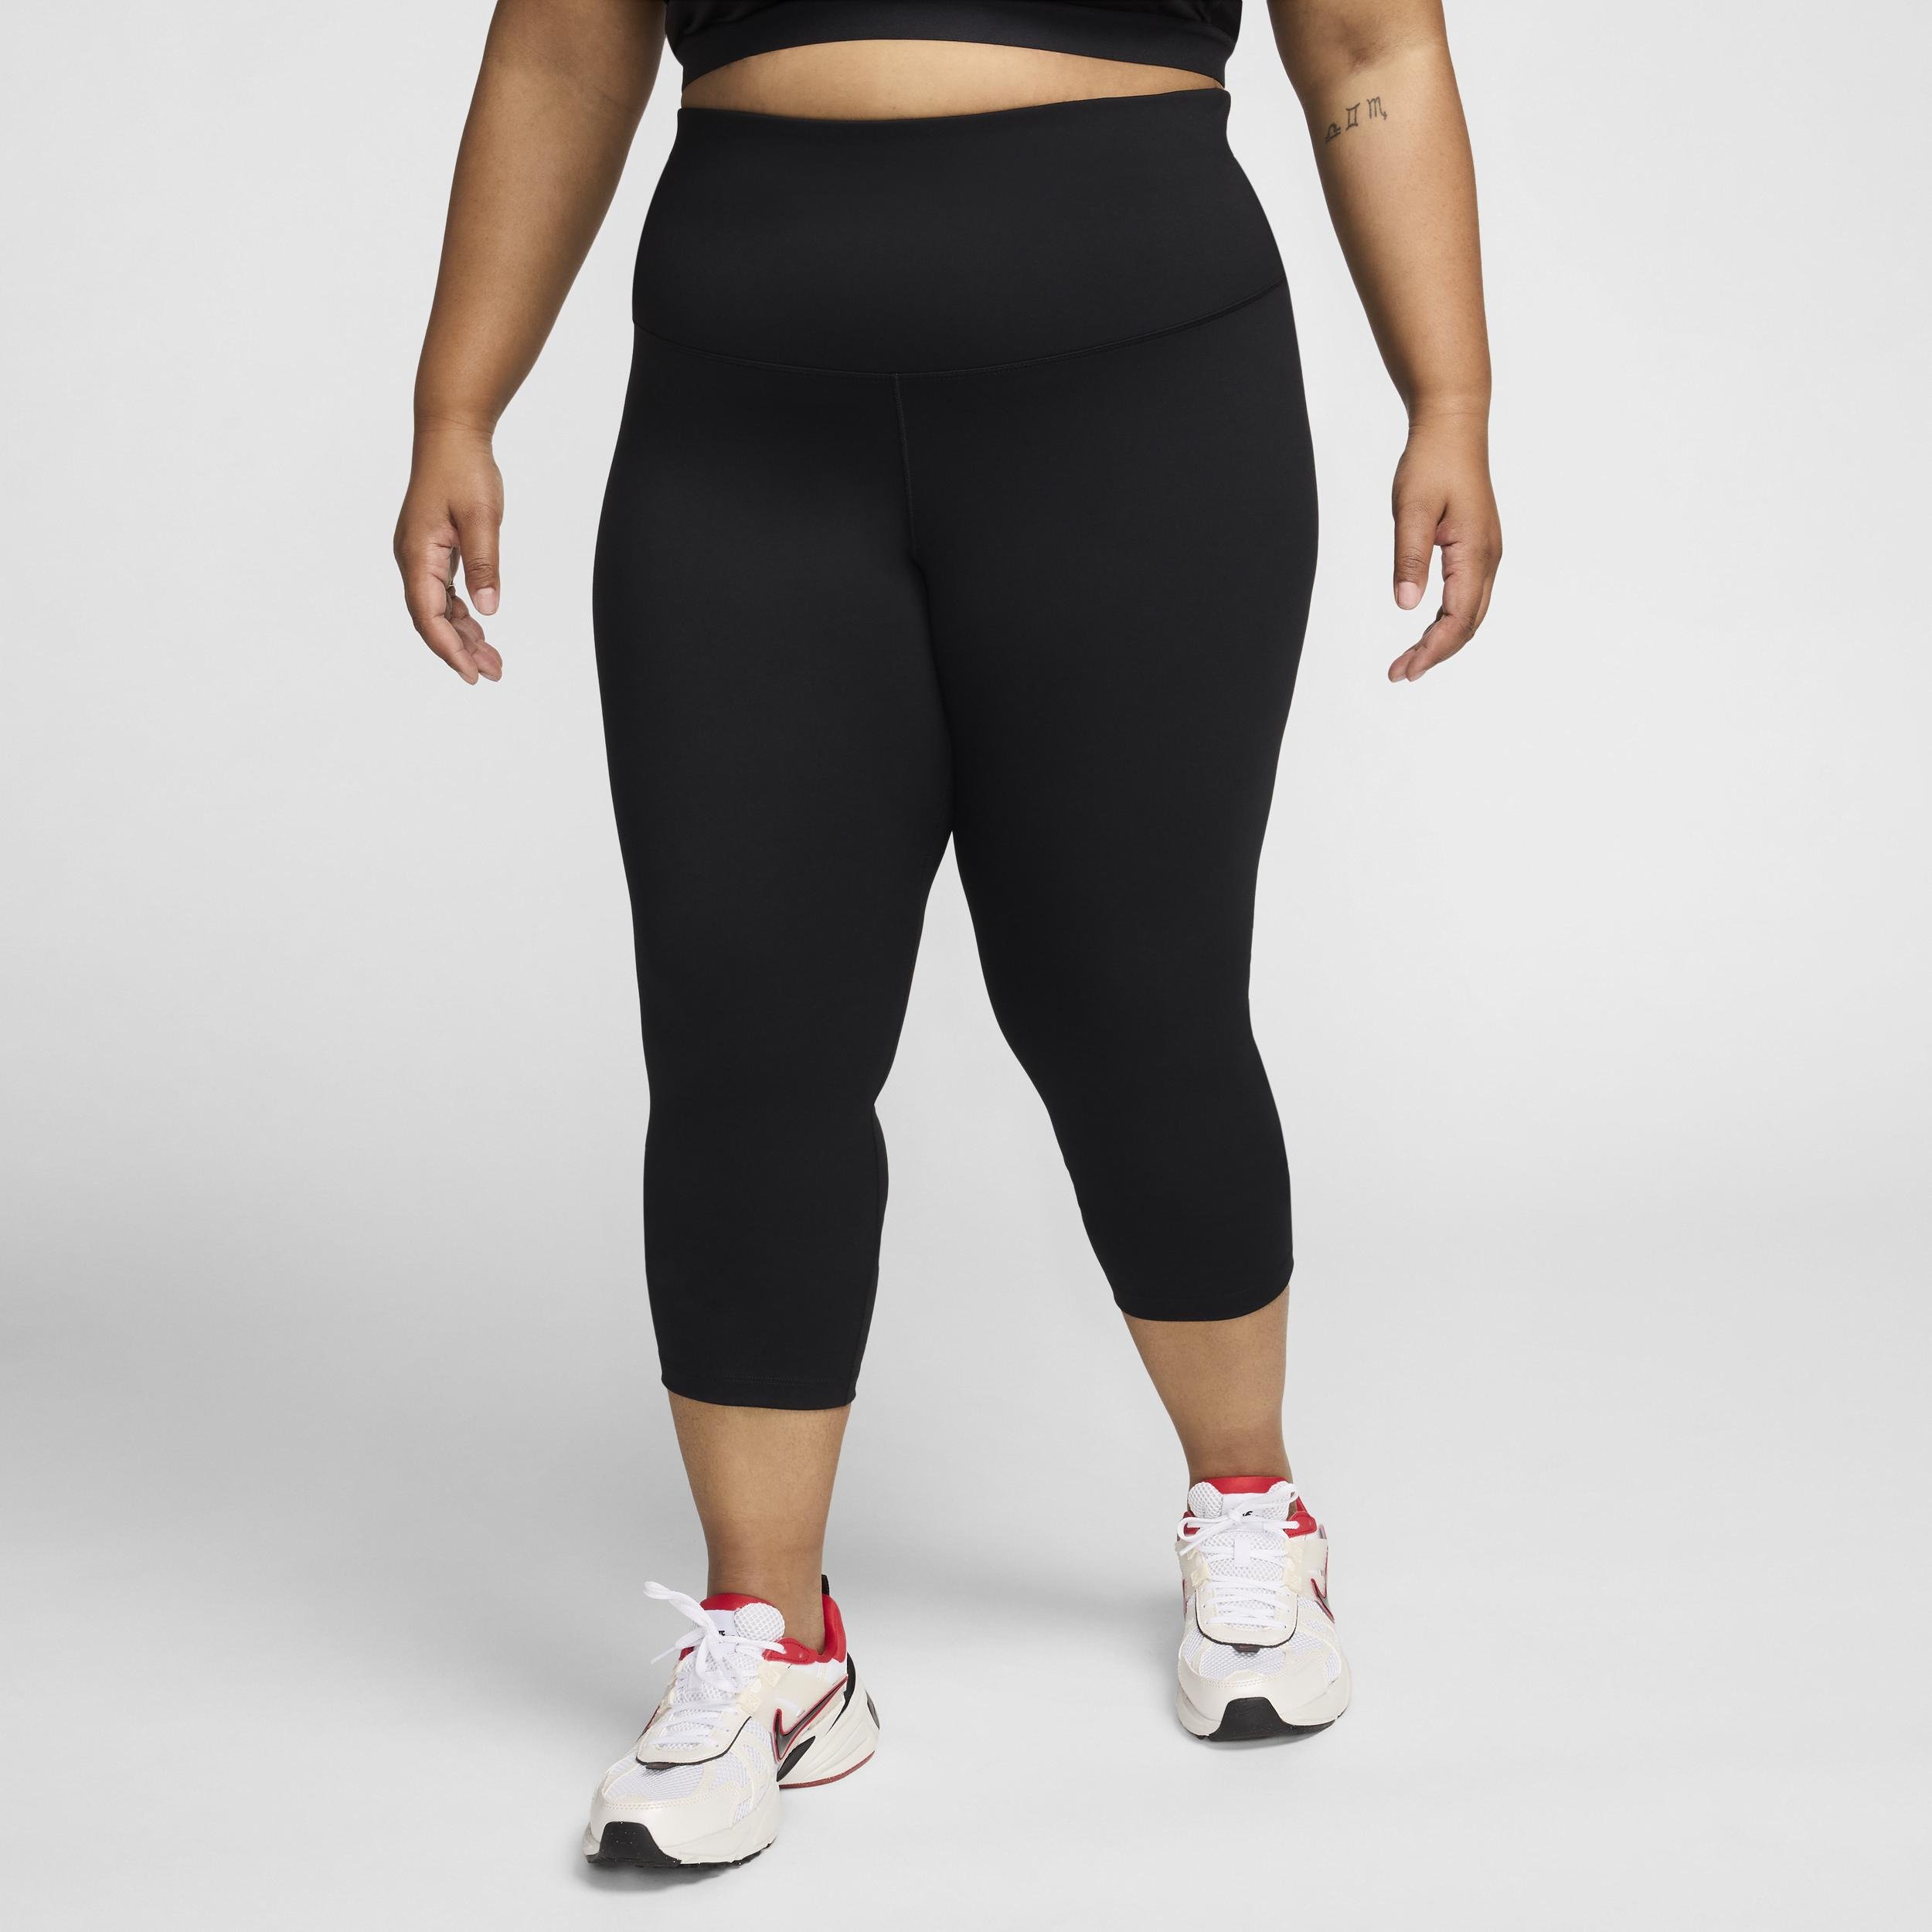 Nike Women's One High-Waisted Crop Leggings (Plus Size) by NIKE